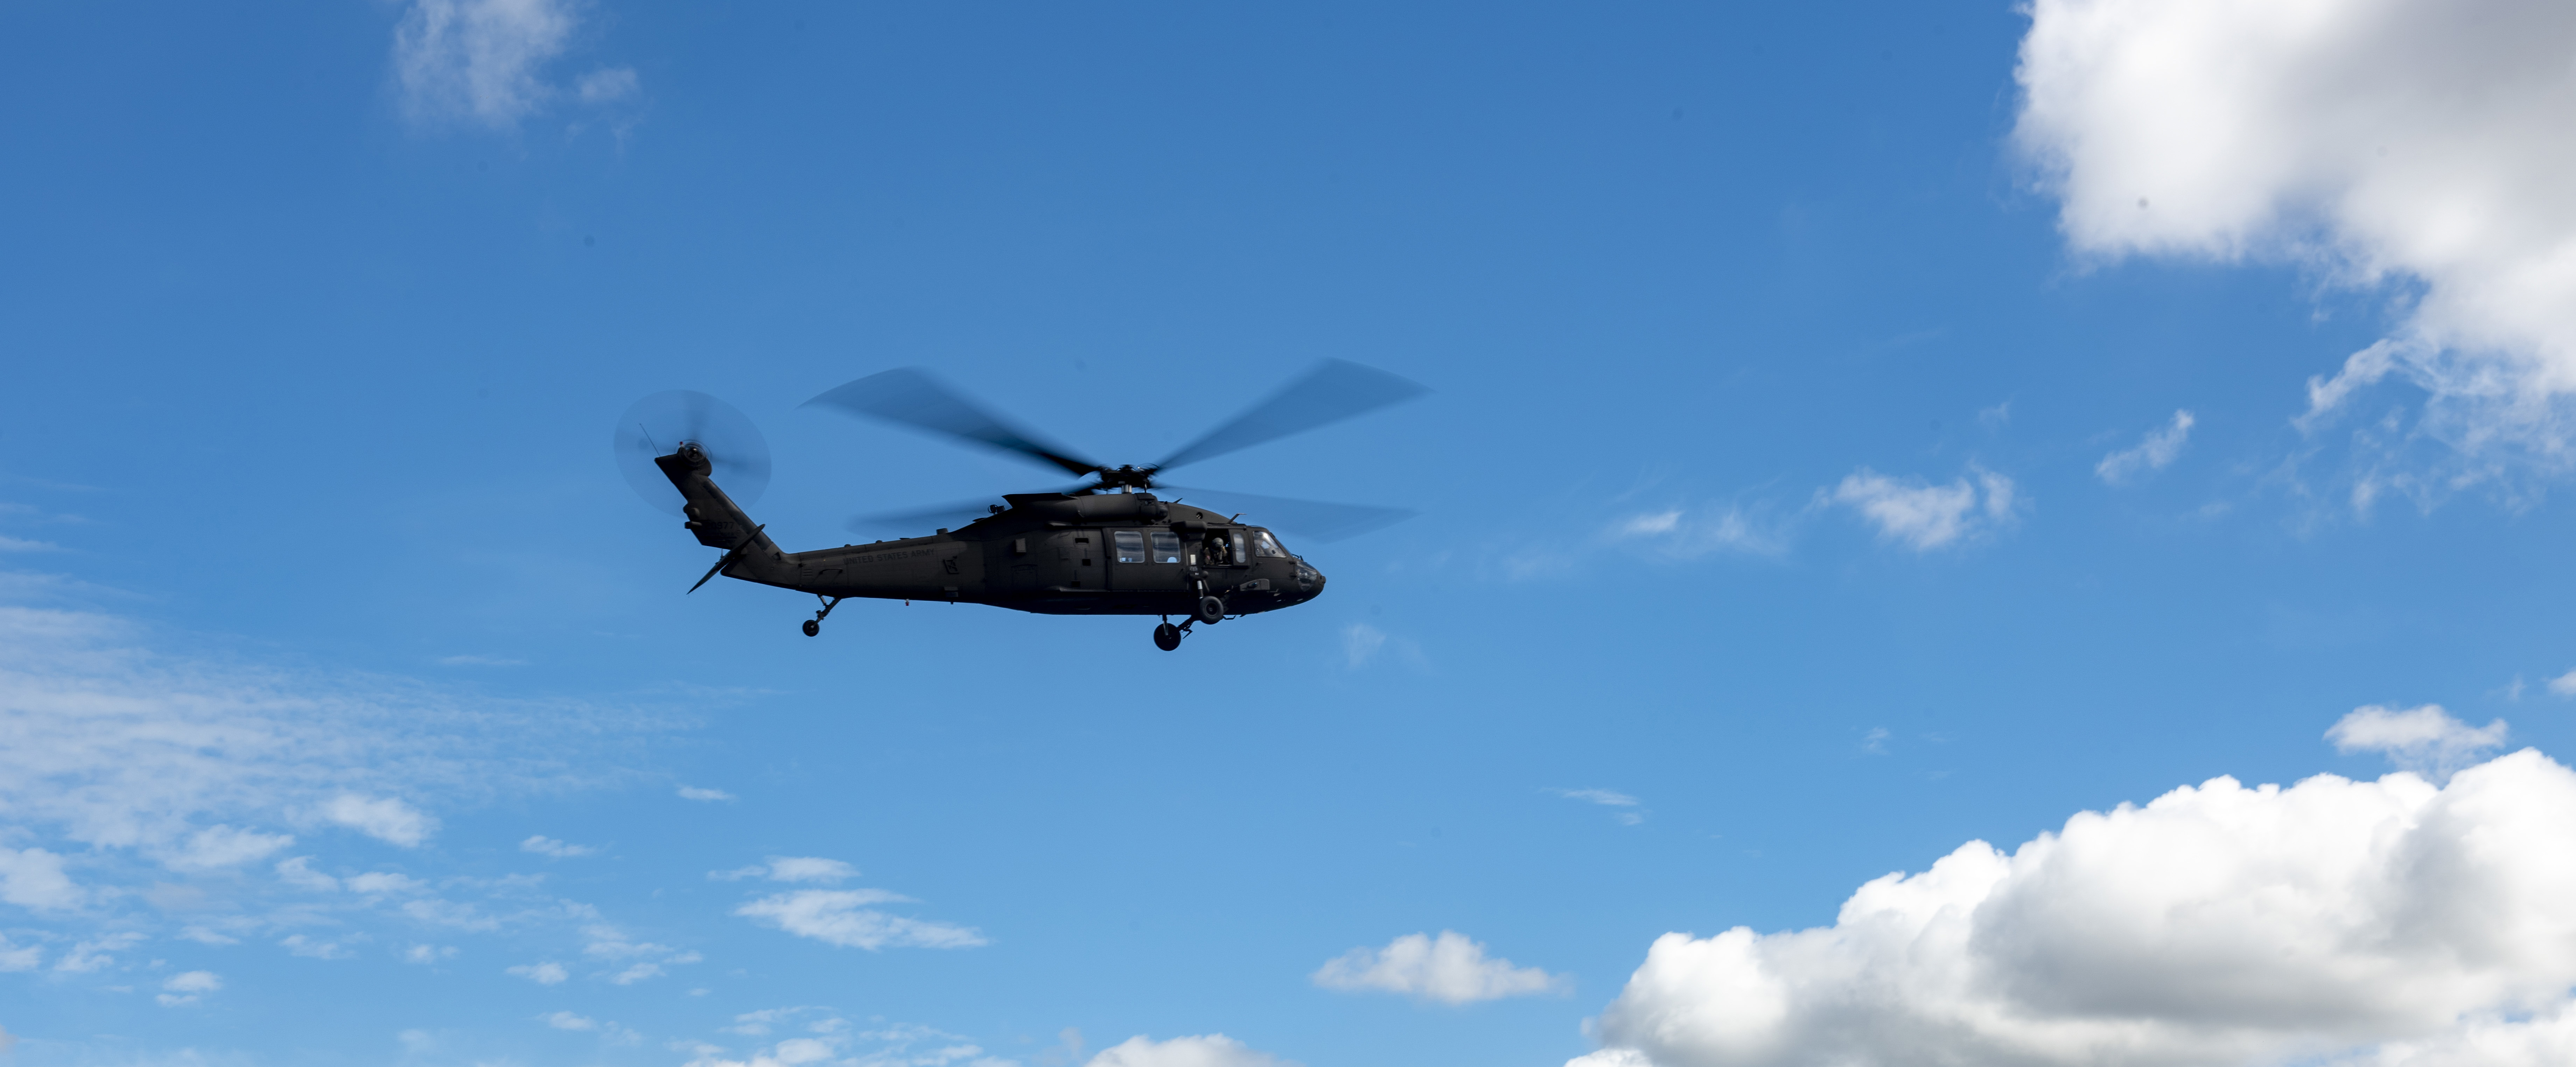 U.S. Army helicopter in flight